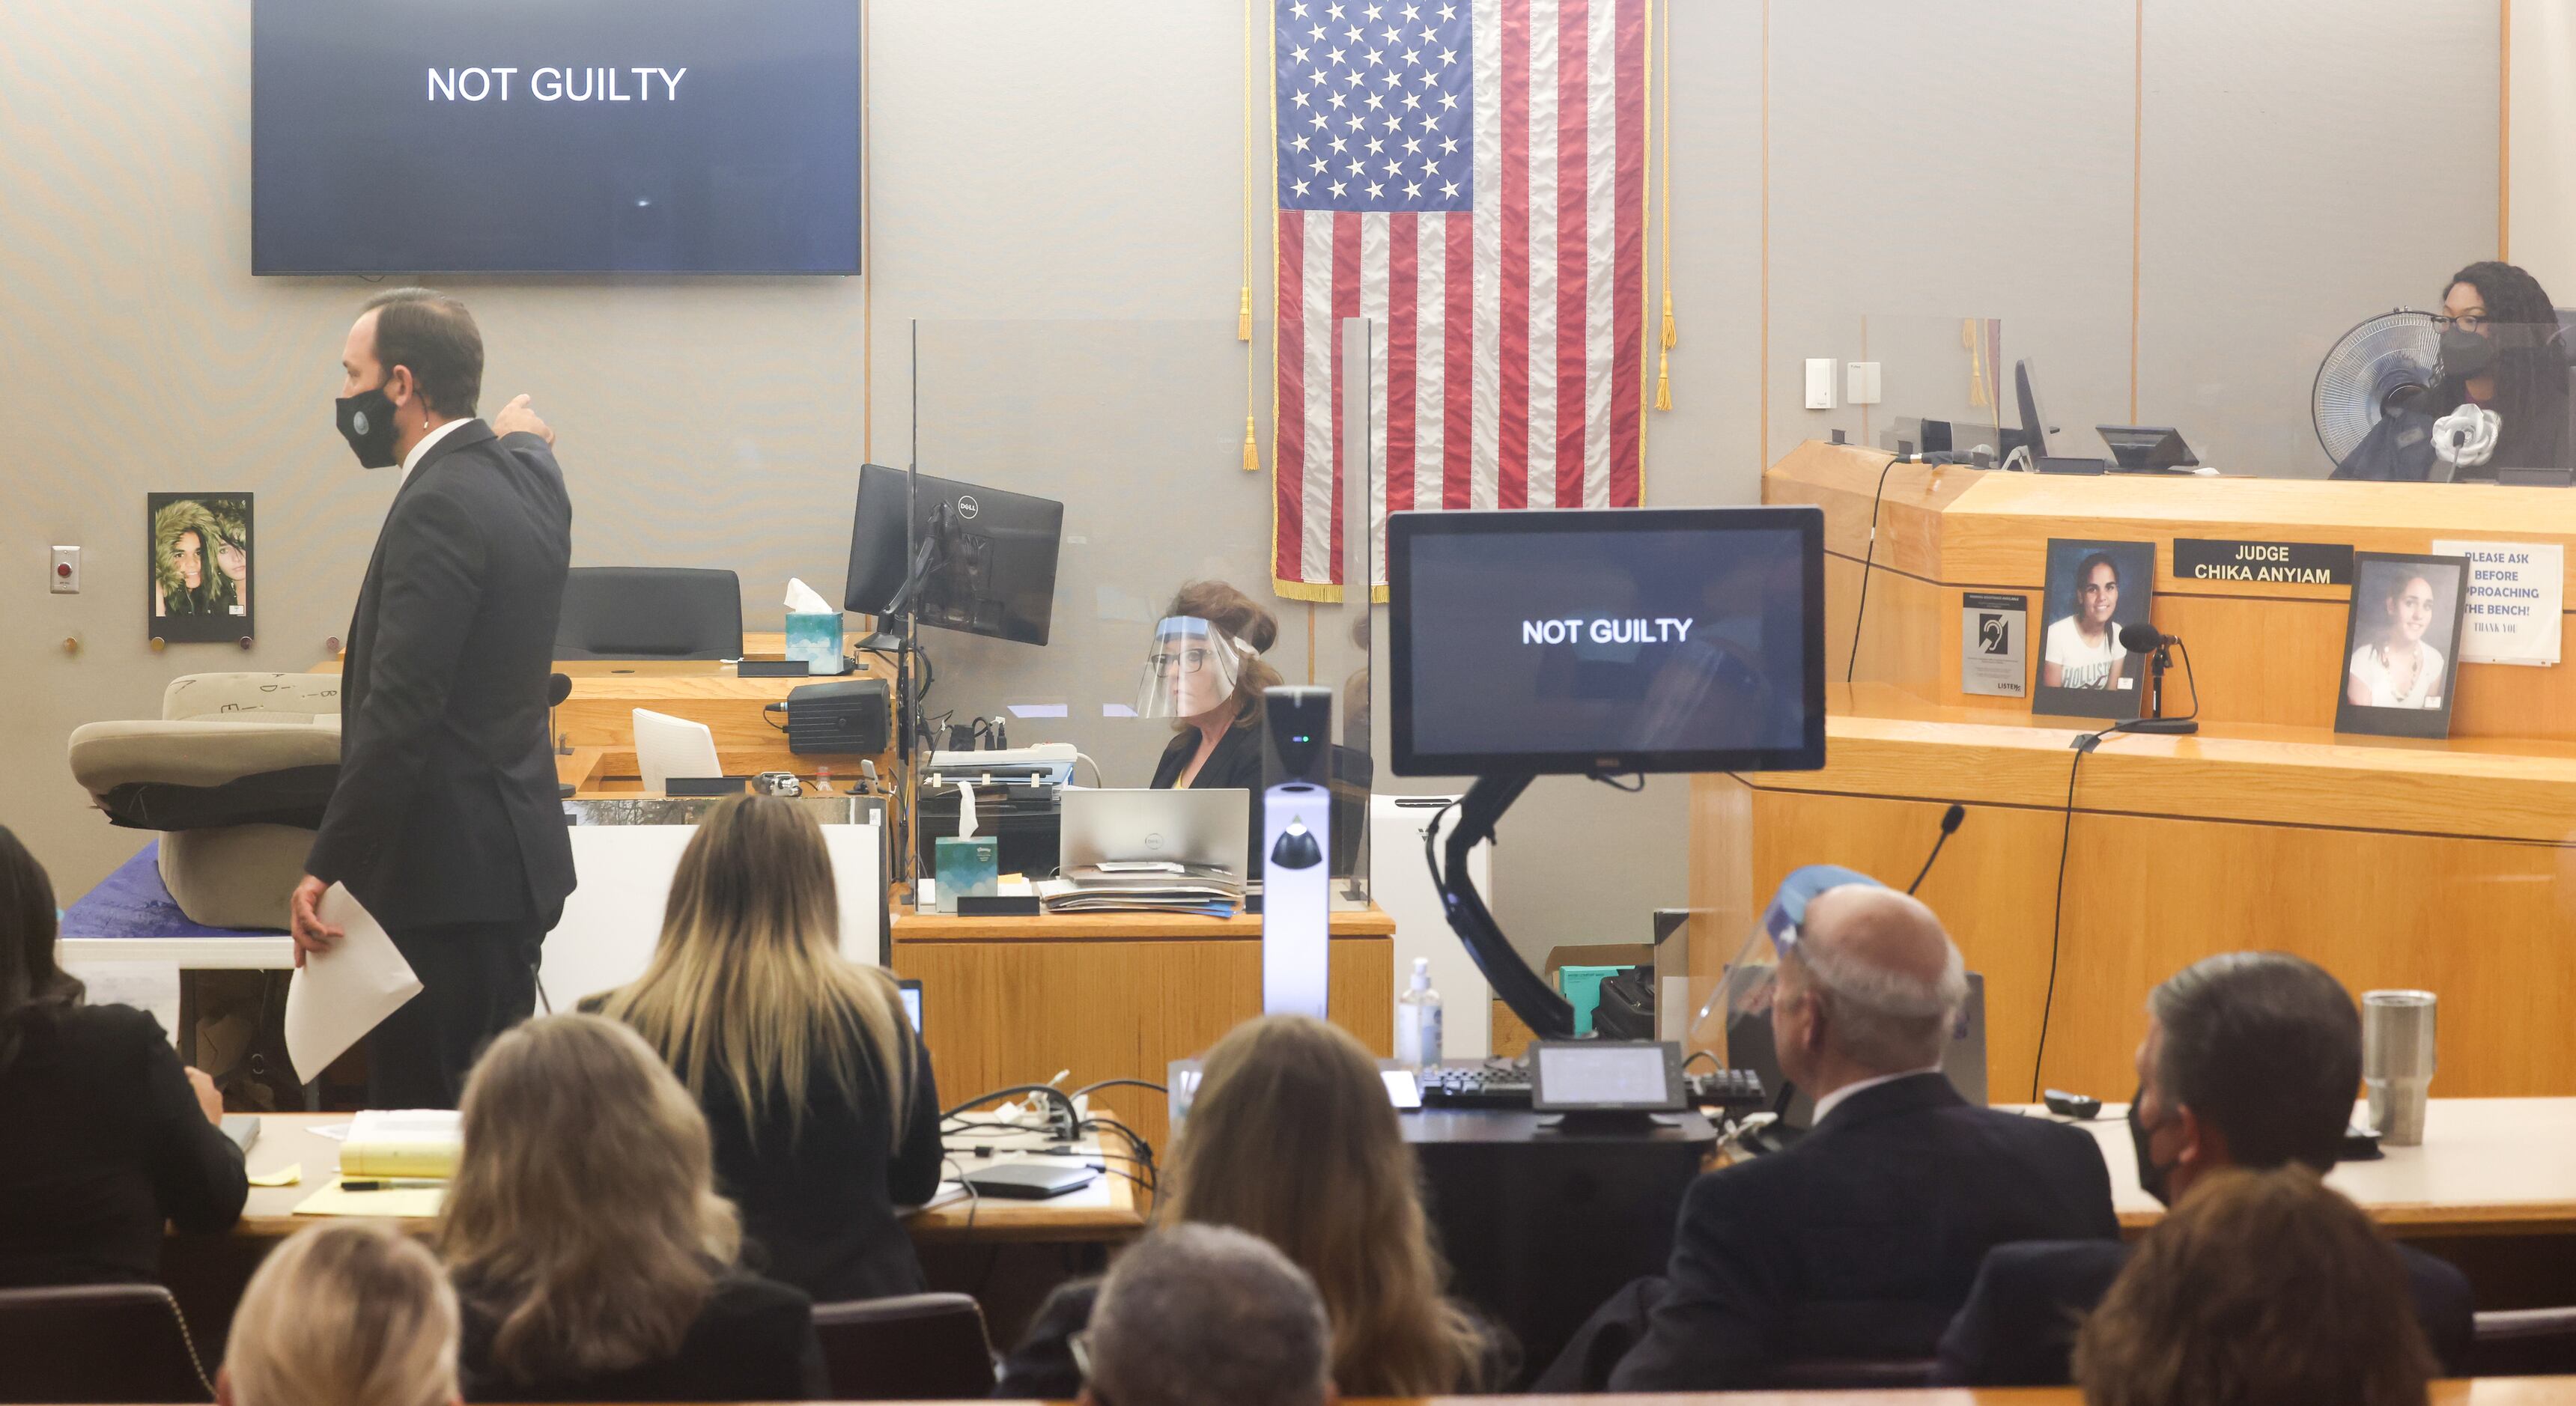 Defense lawyer Joseph Patton points to the screen as he gives closing remarks in the trial...